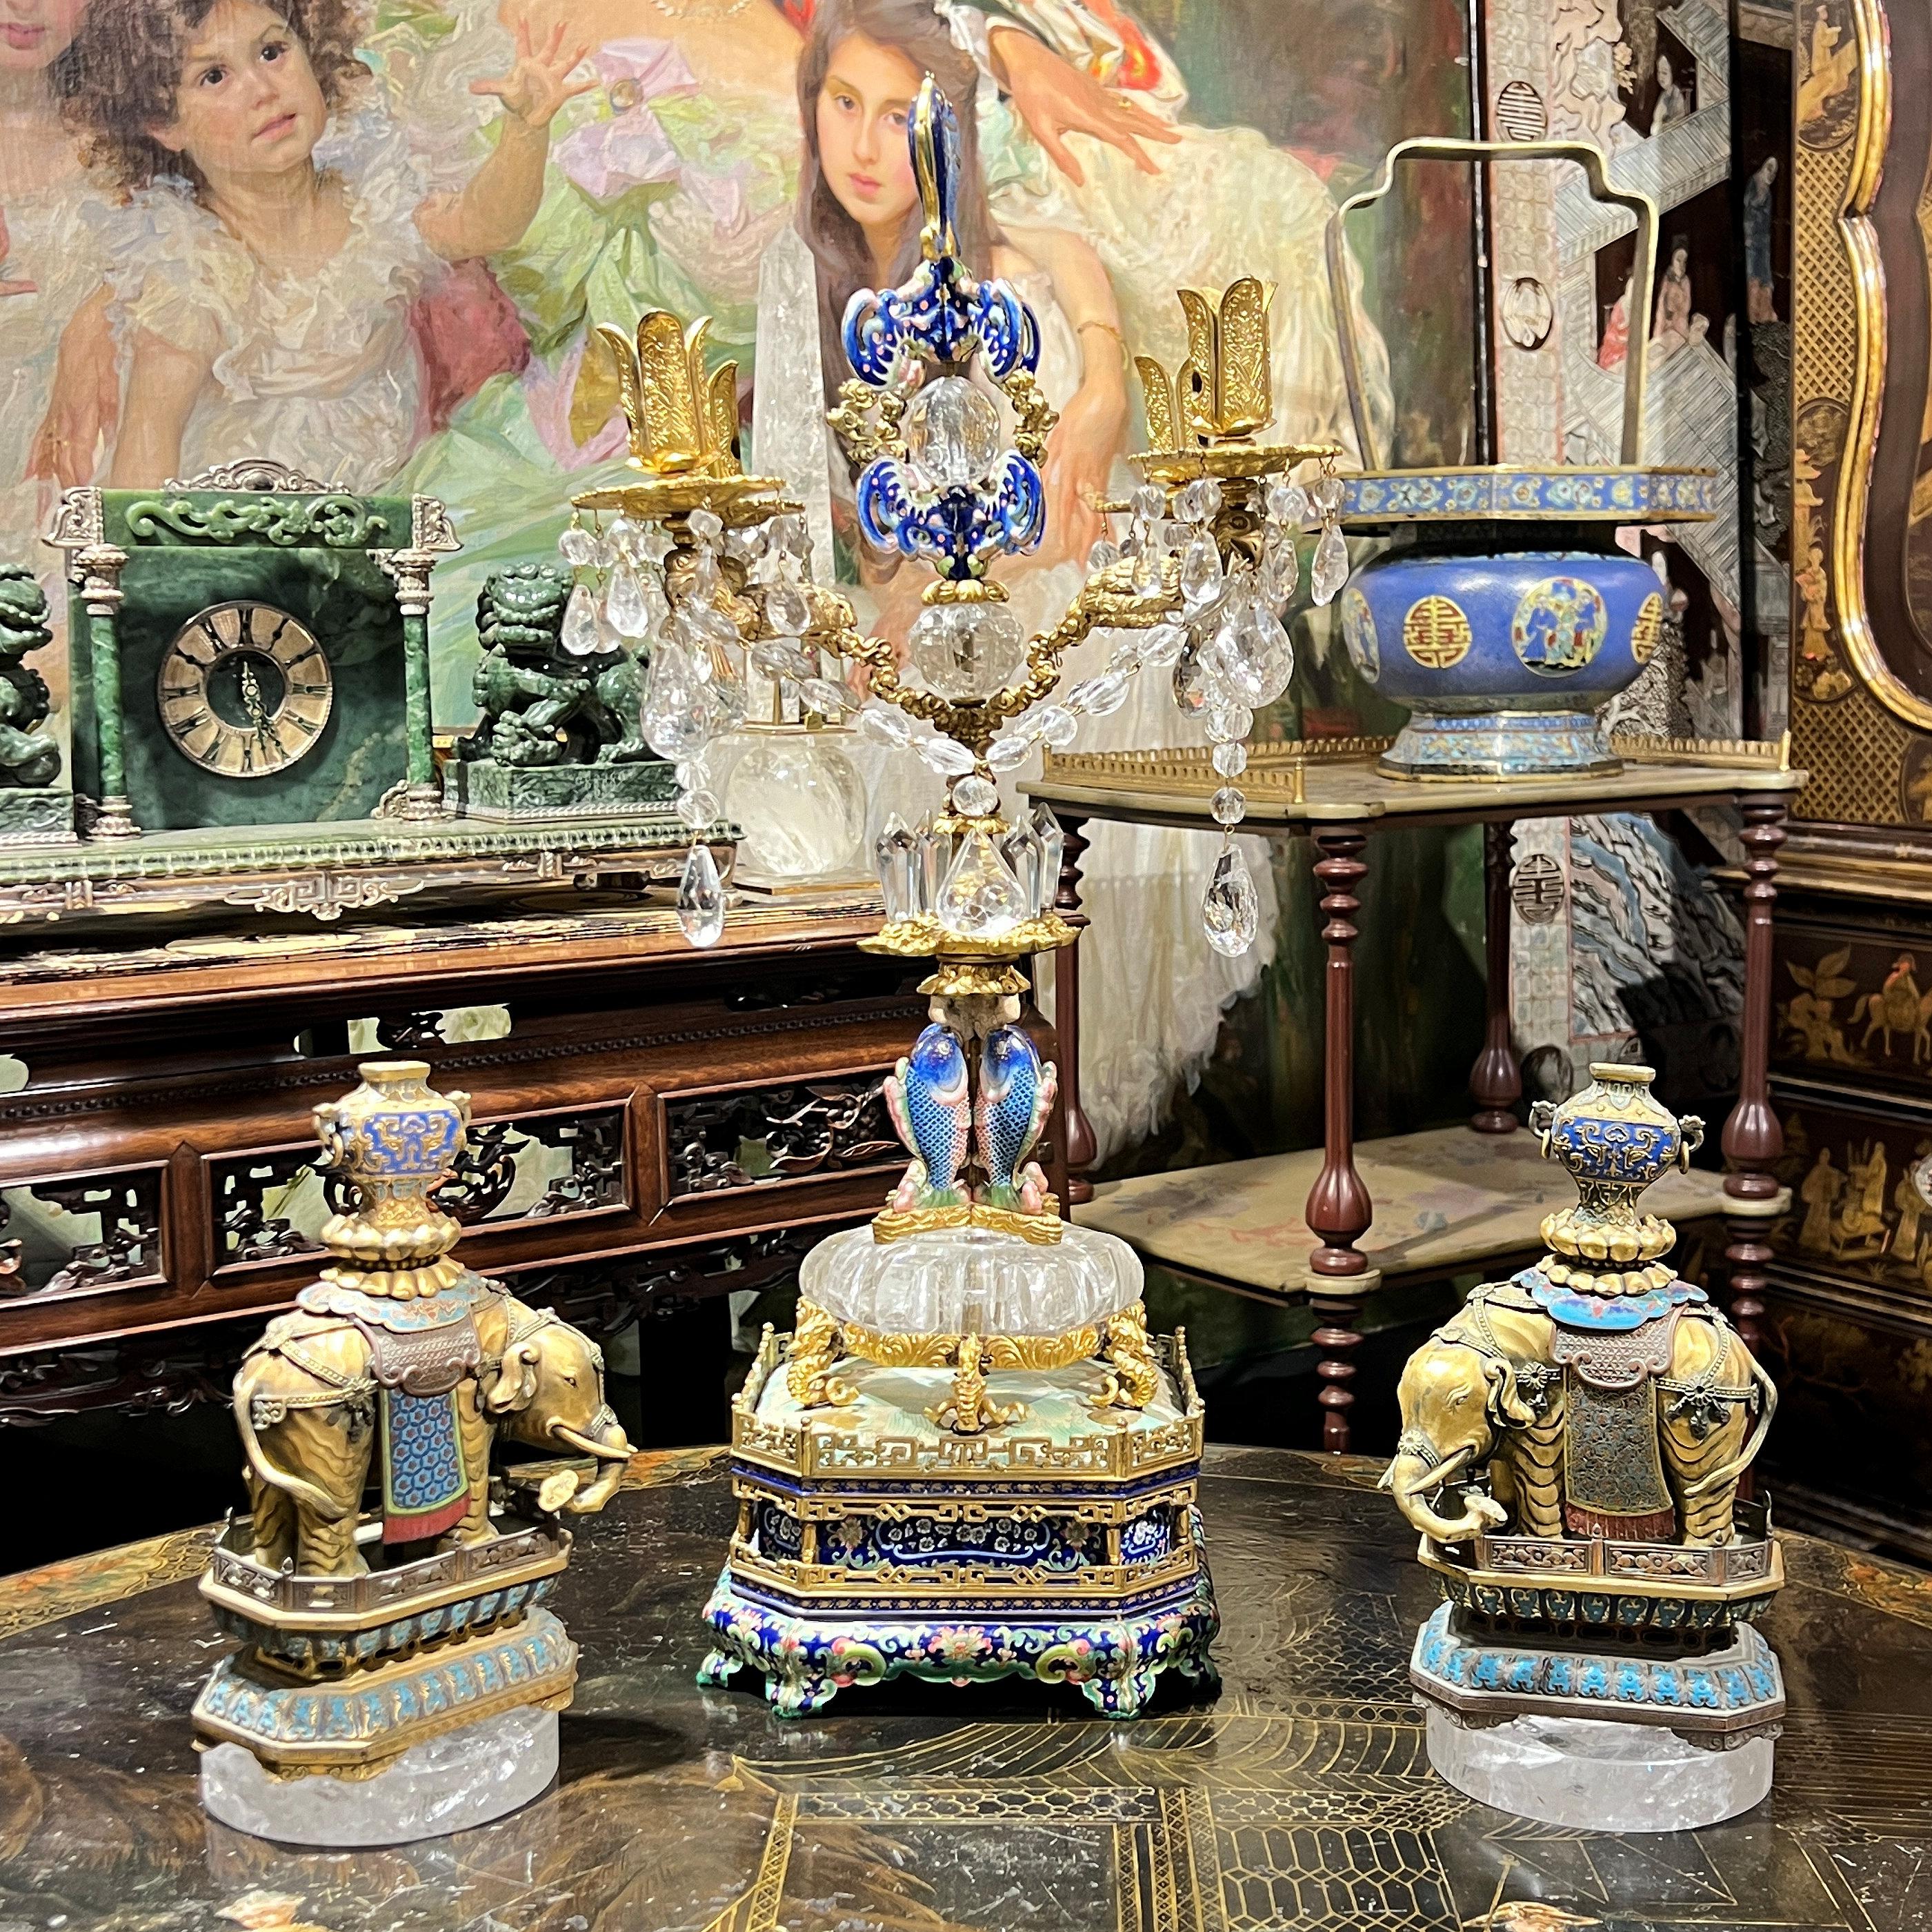 Our extraordinary Chinese candelabrum dates from as early as the 18th century with later 19th century additions is exquisitely crafted from rock crystal and gilt metal with enamel designs including fish and bats, with four candle arms and a square